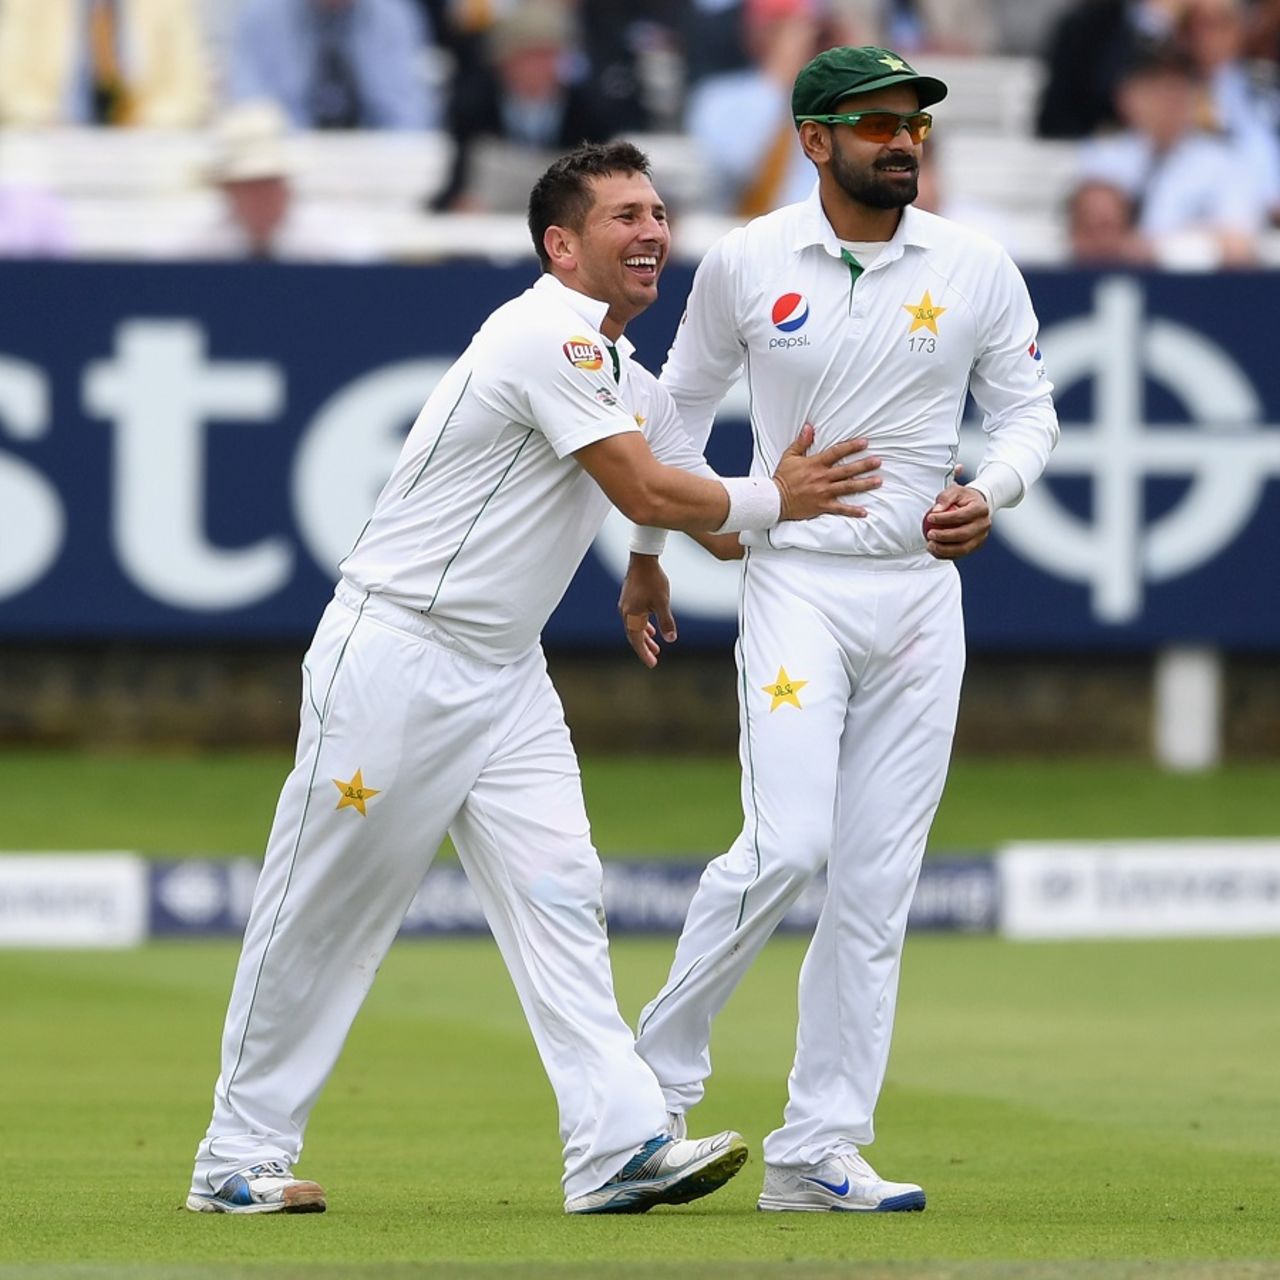 Yasir Shah and Mohammad Hafeez combined to get rid of Joe Root, England v Pakistan, 1st Investec Test, Lord's, 2nd day, July 15, 2016